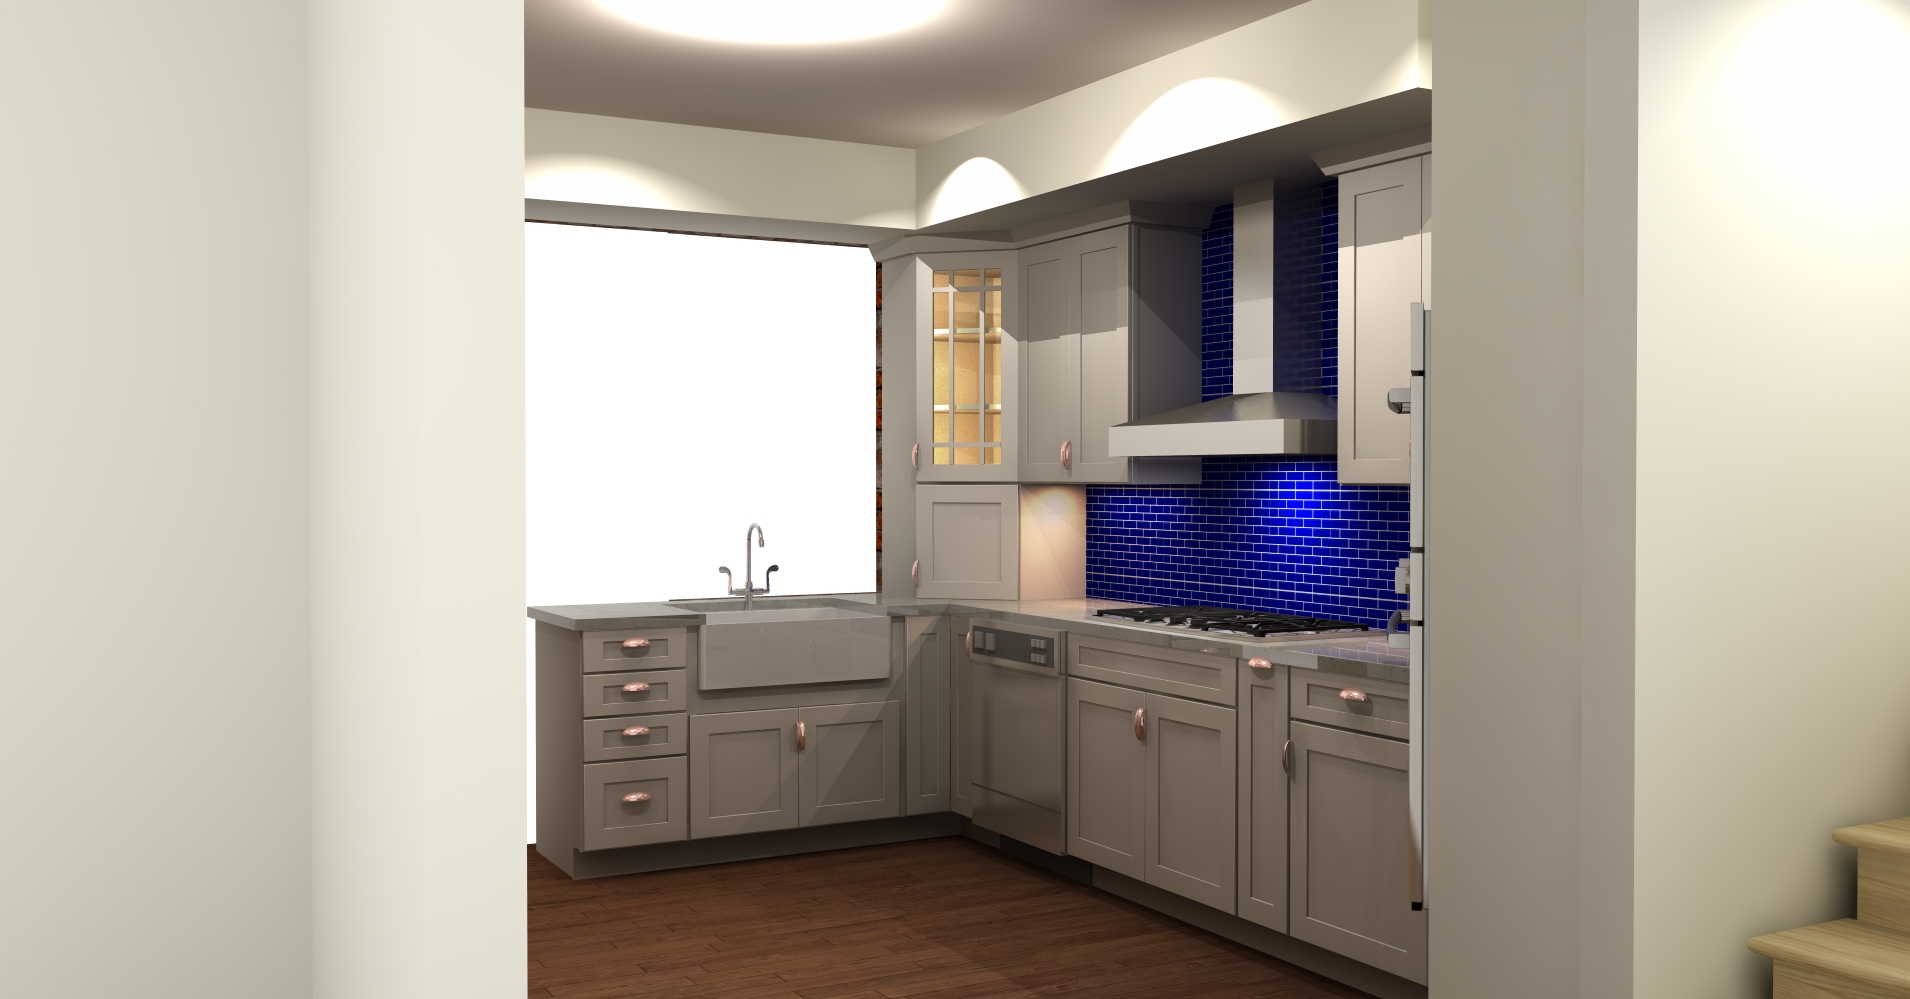 Best Kitchen and Bathroom Remodeling in Virginia, Maryland and DC